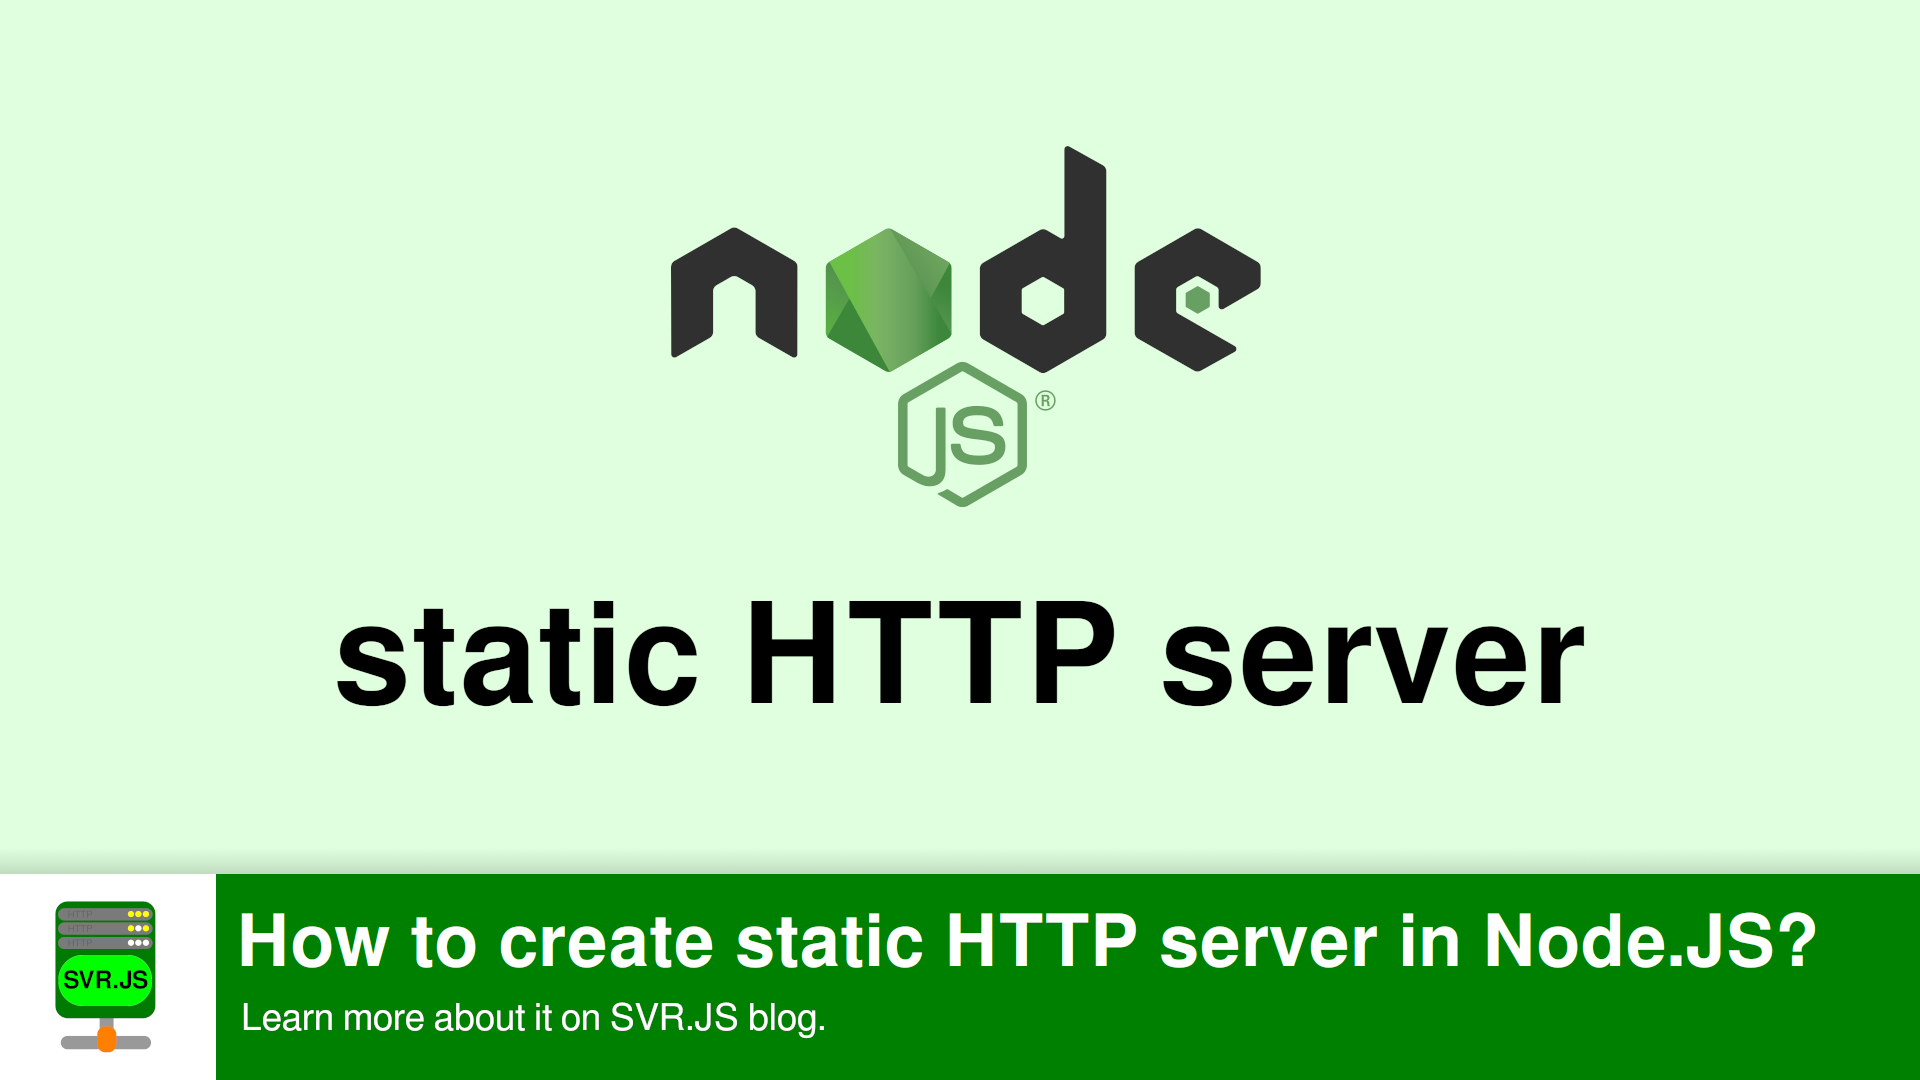 How to create static HTTP server in Node.JS?